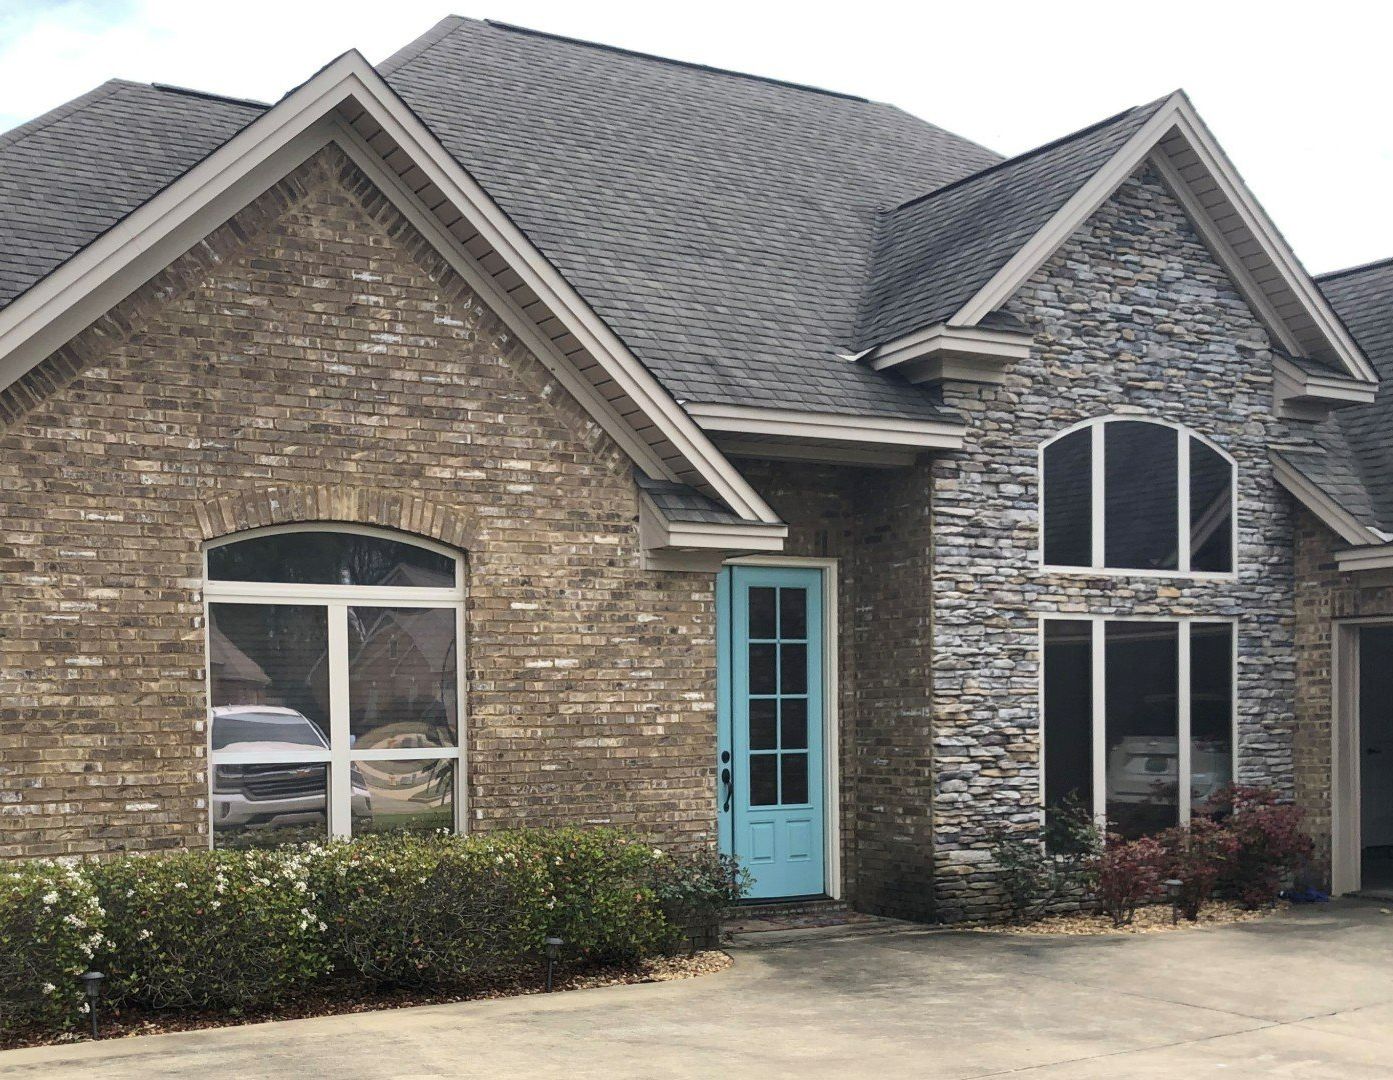 local home window tinting service in Prattville - After top power savings gained & UV-Sun-fading stopped. With SPF Home Tint installed in Prattville AL